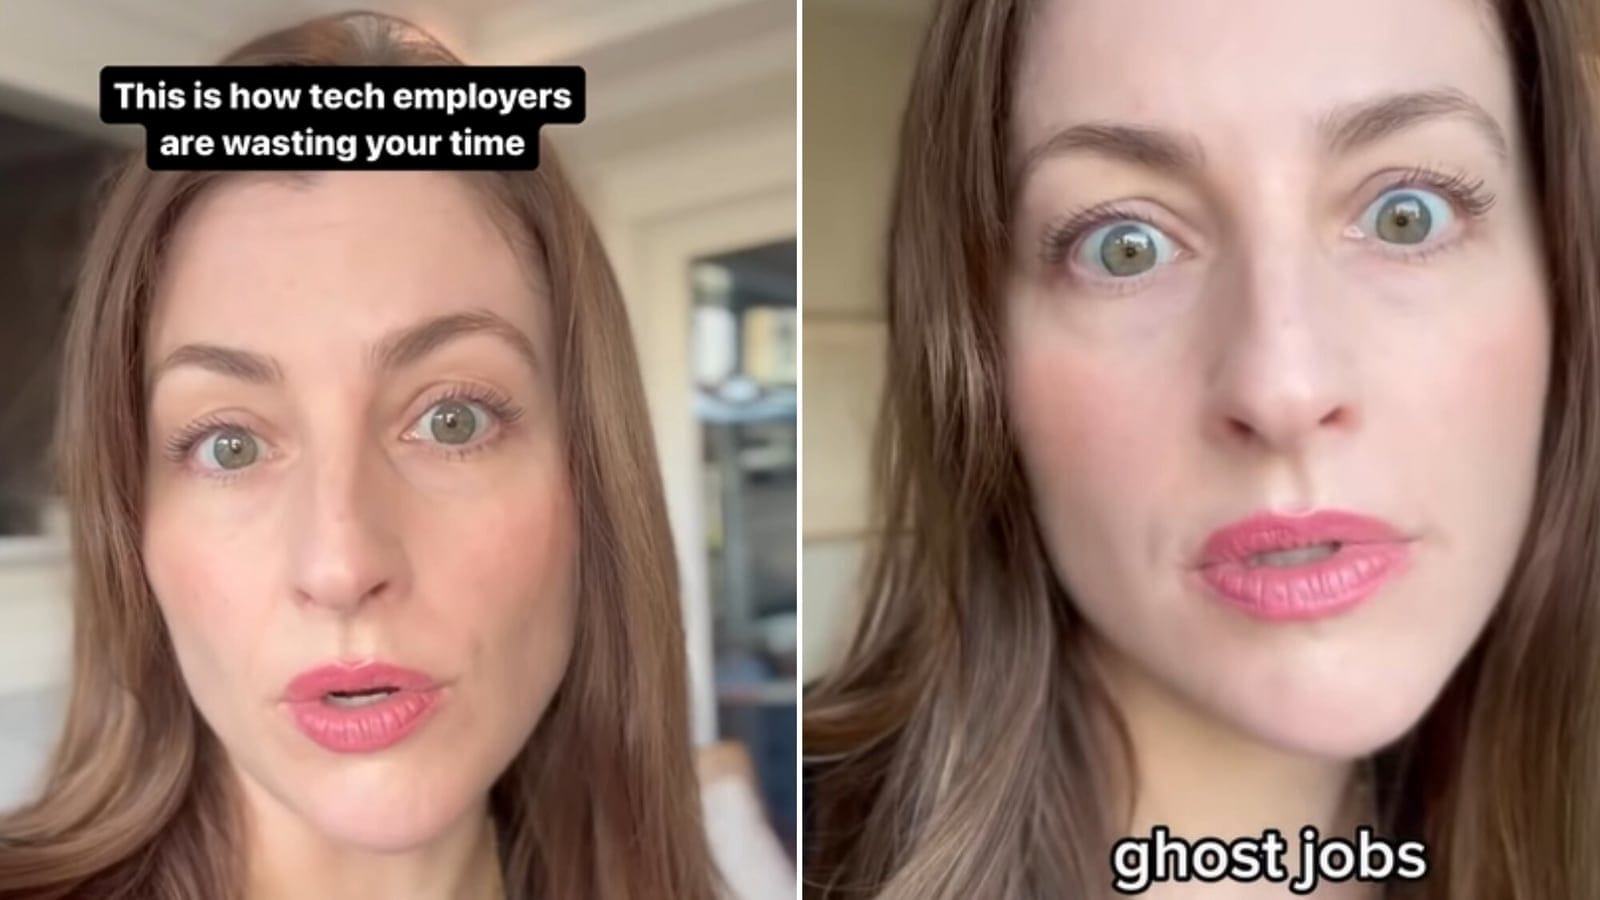 Woman shares about 'ghost jobs' at tech companies, calls it the 'new horrific trend'. Threads post shocks people